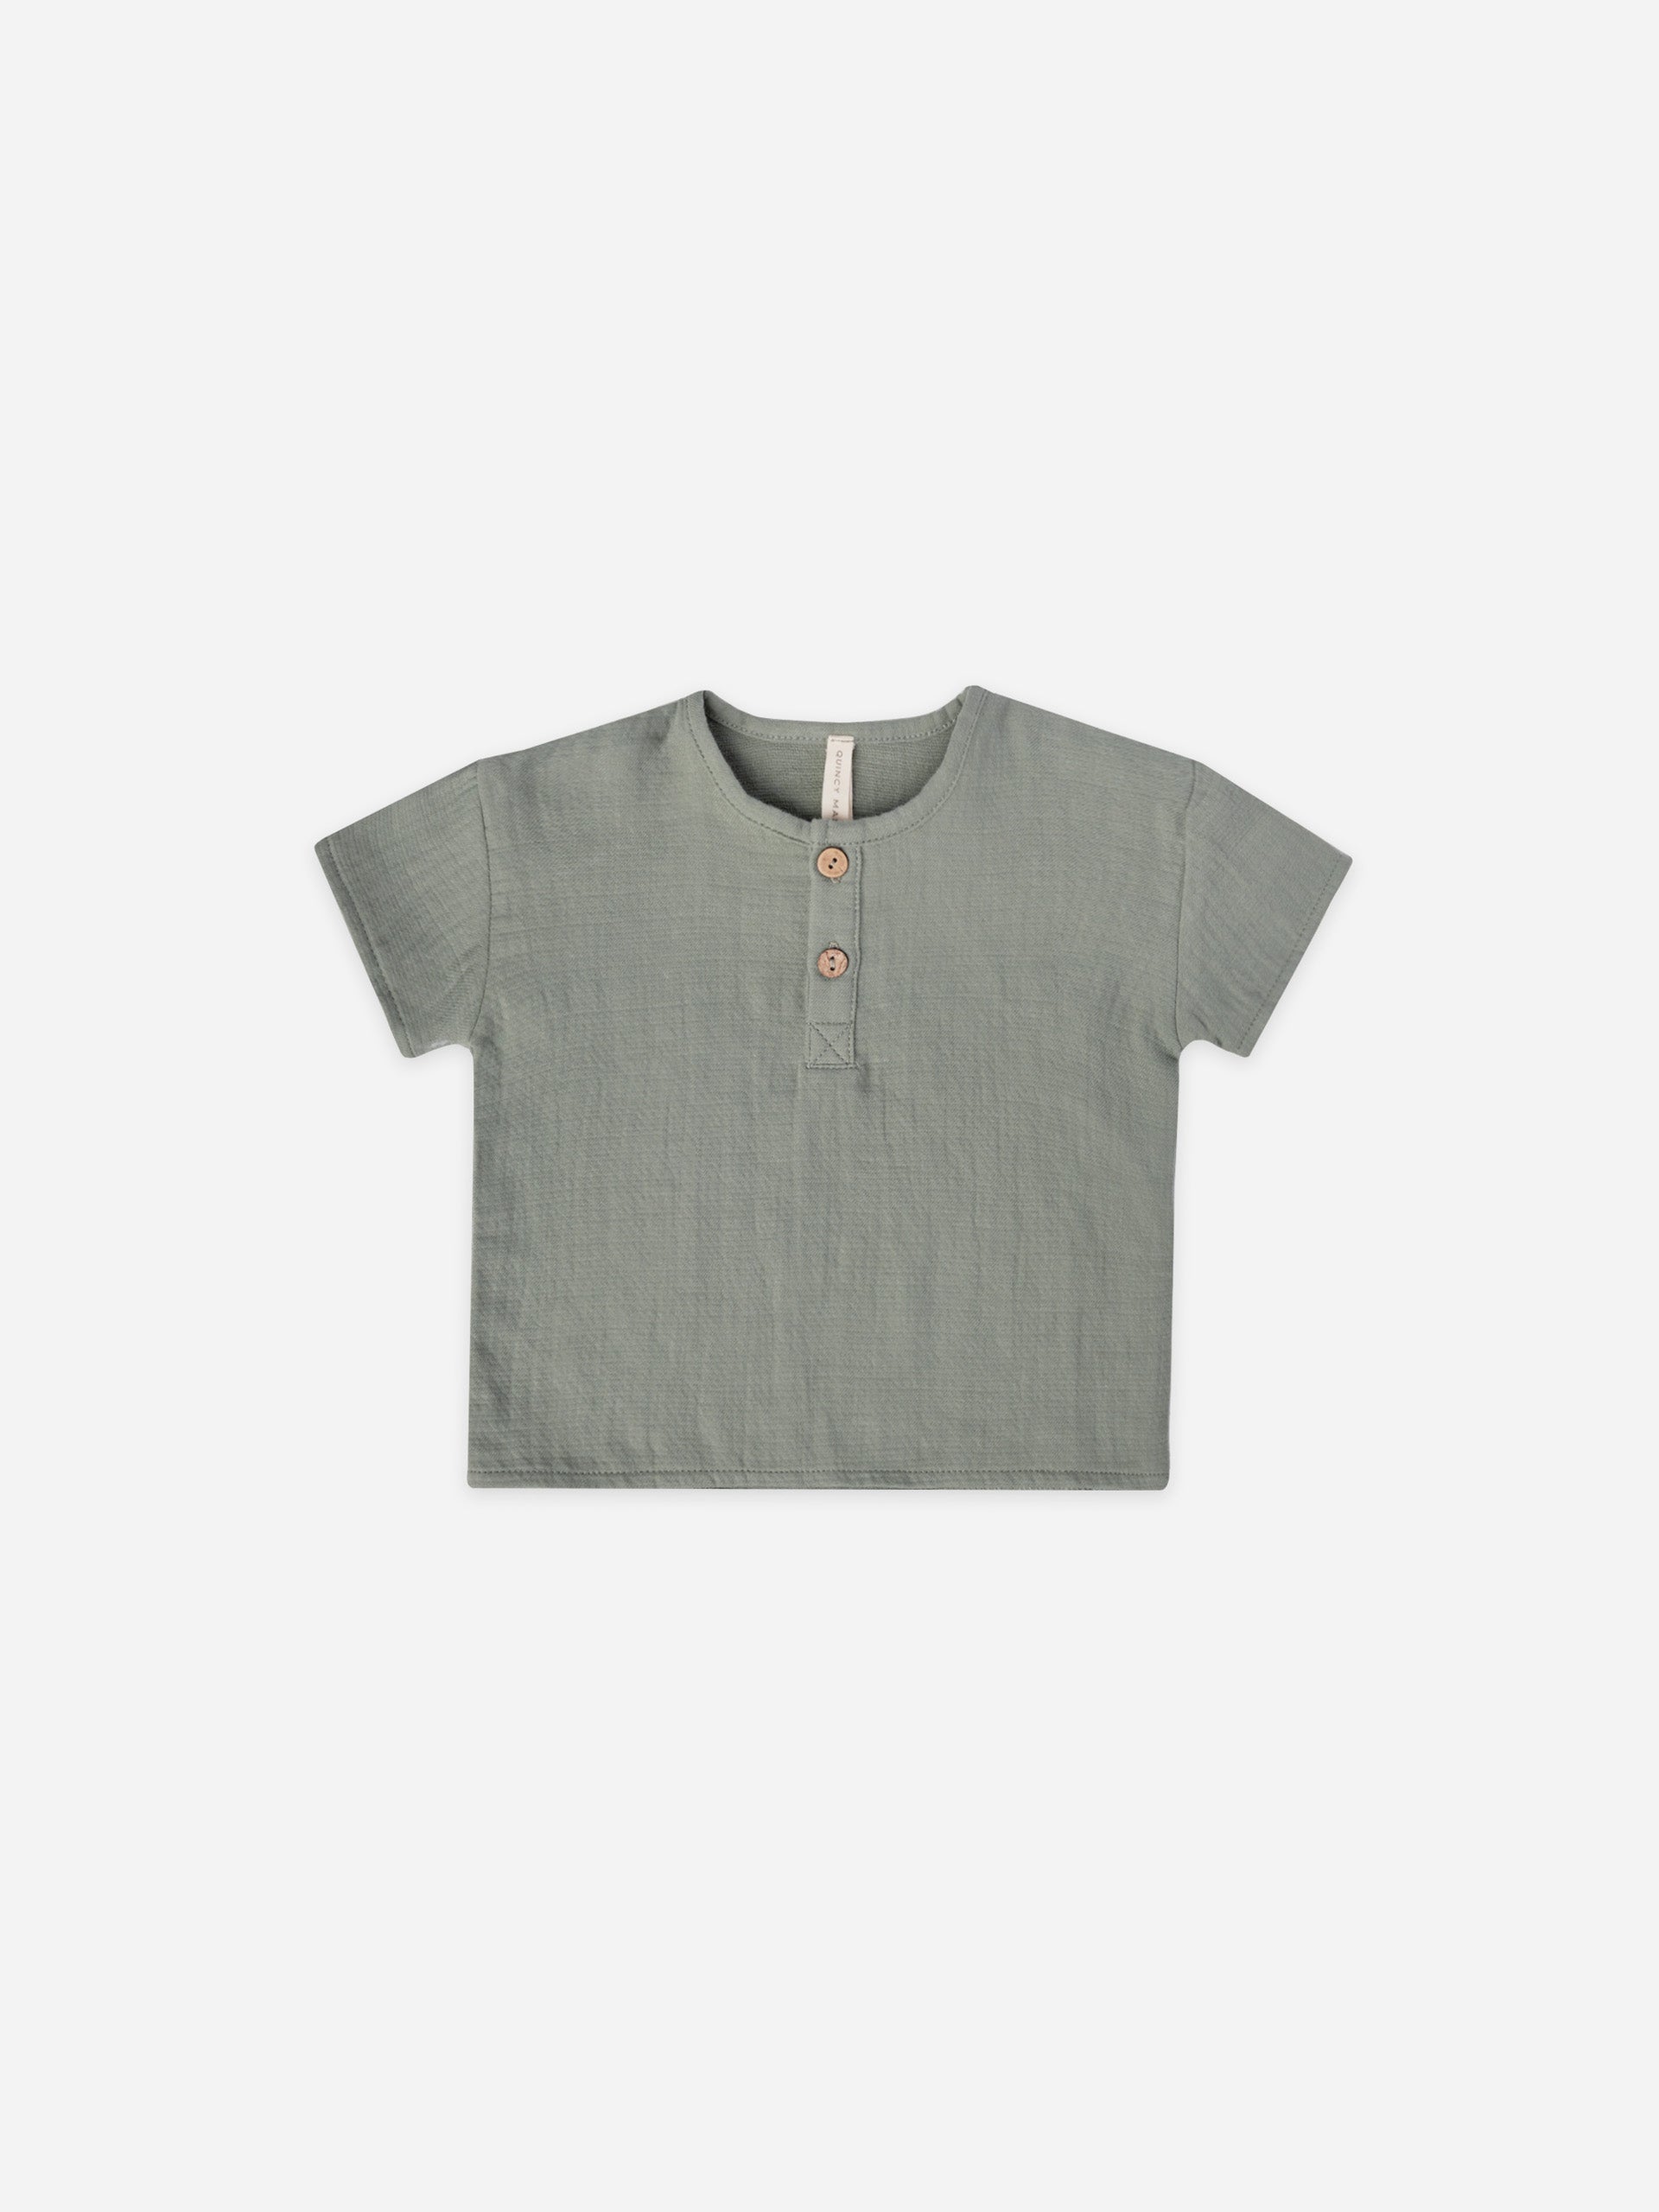 henry top | sea green - Quincy Mae | Baby Basics | Baby Clothing | Organic Baby Clothes | Modern Baby Boy Clothes |